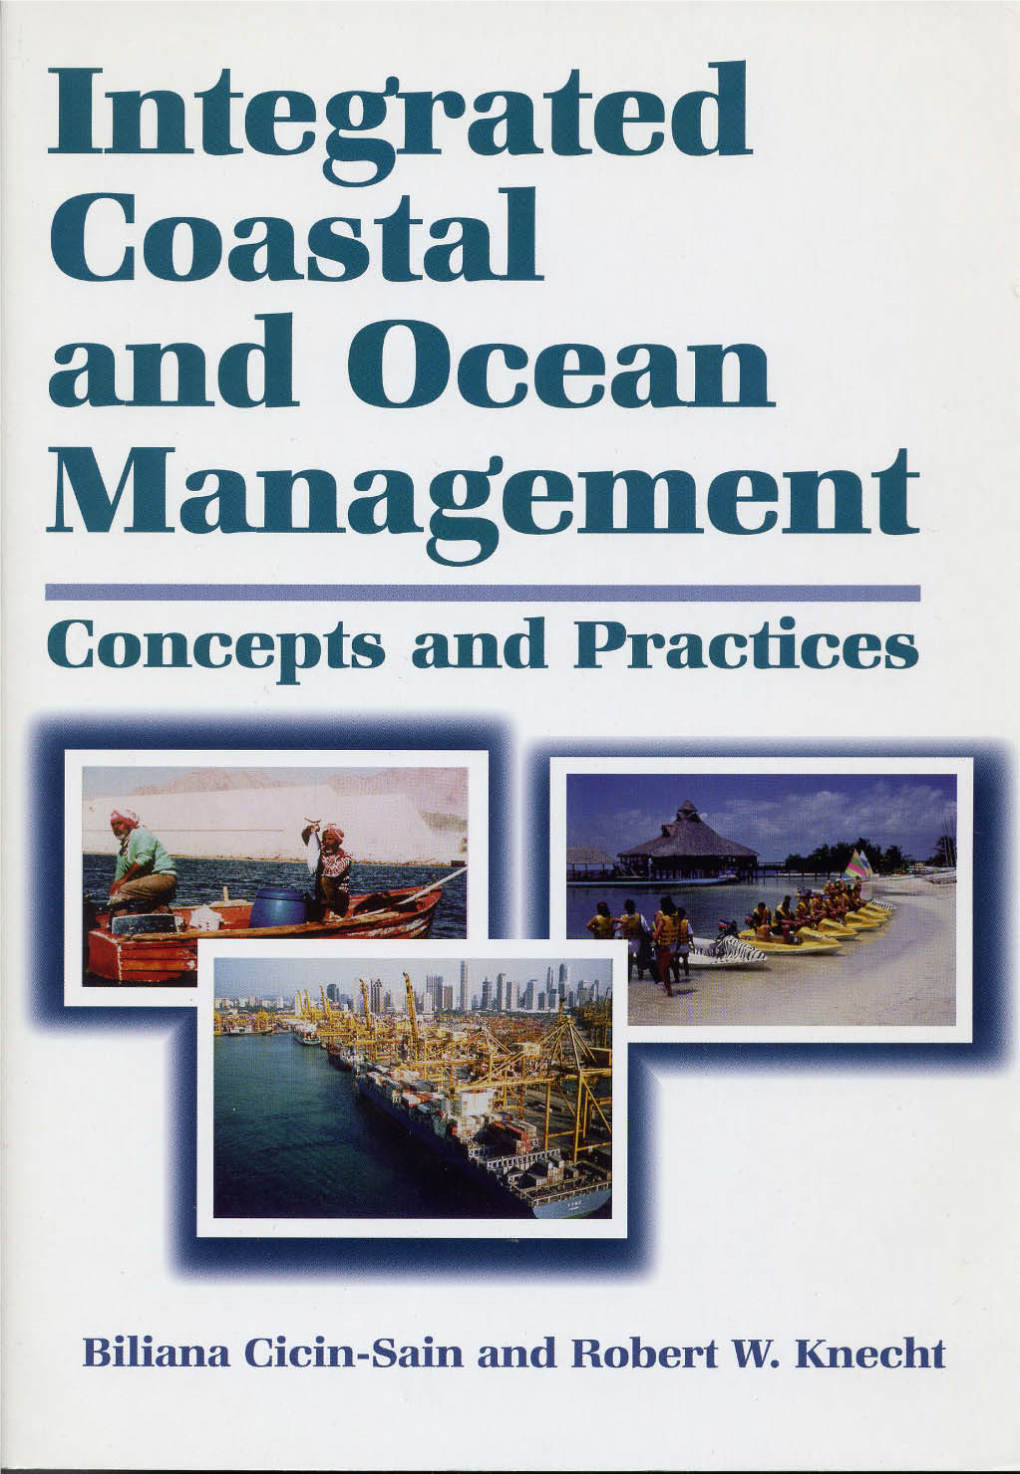 Integrated Coastal and Ocean Management: Concepts and Practices, August 27